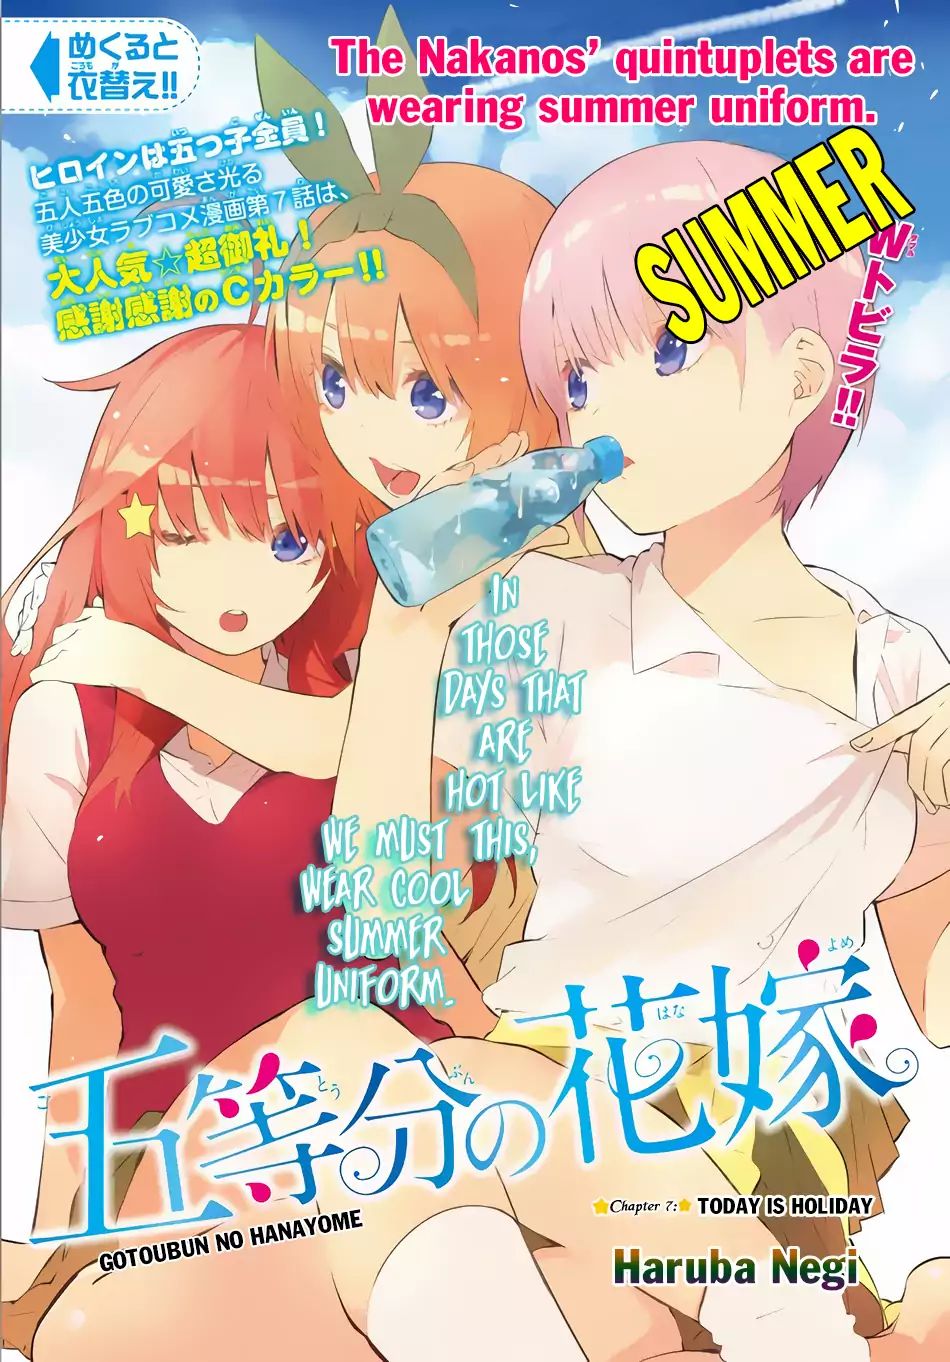 Go-Toubun No Hanayome Vol.2 Chapter 7: Today Is Holiday - Picture 2